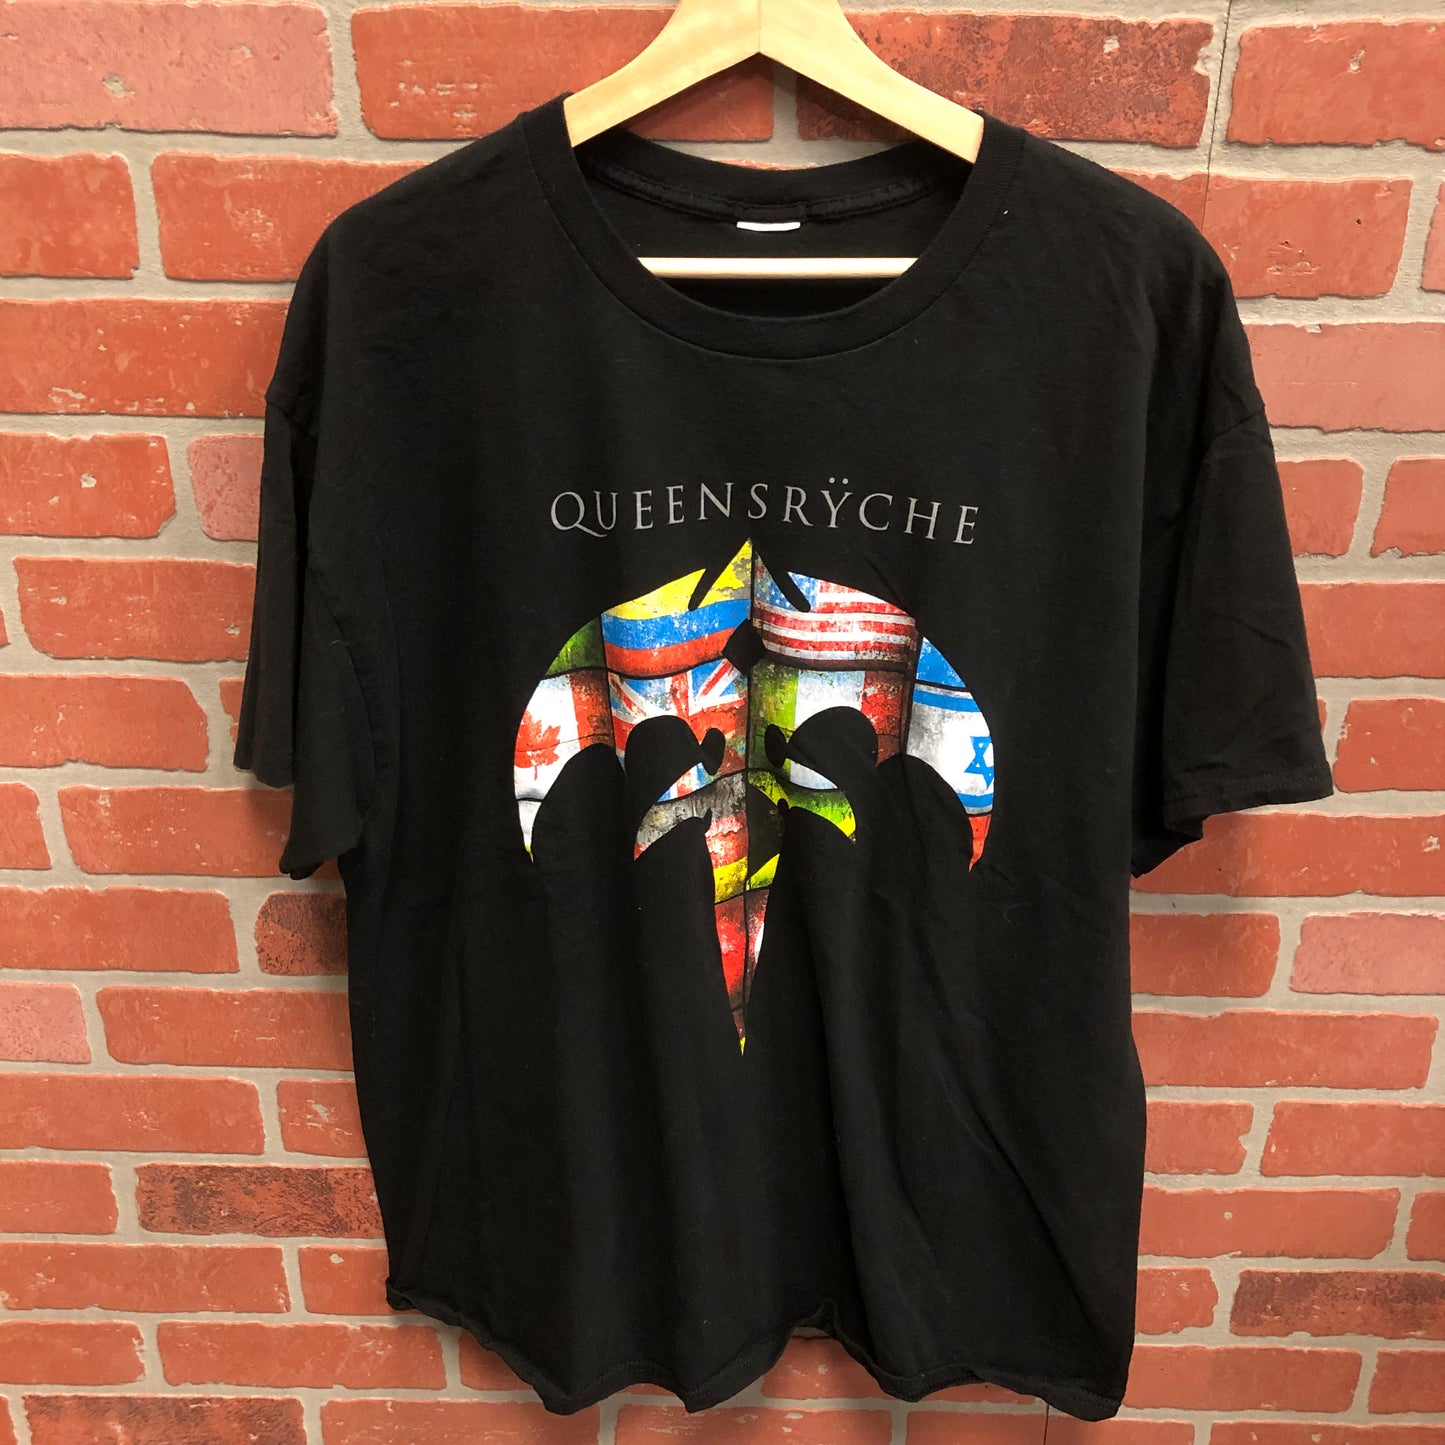 Queensryche Band Tee